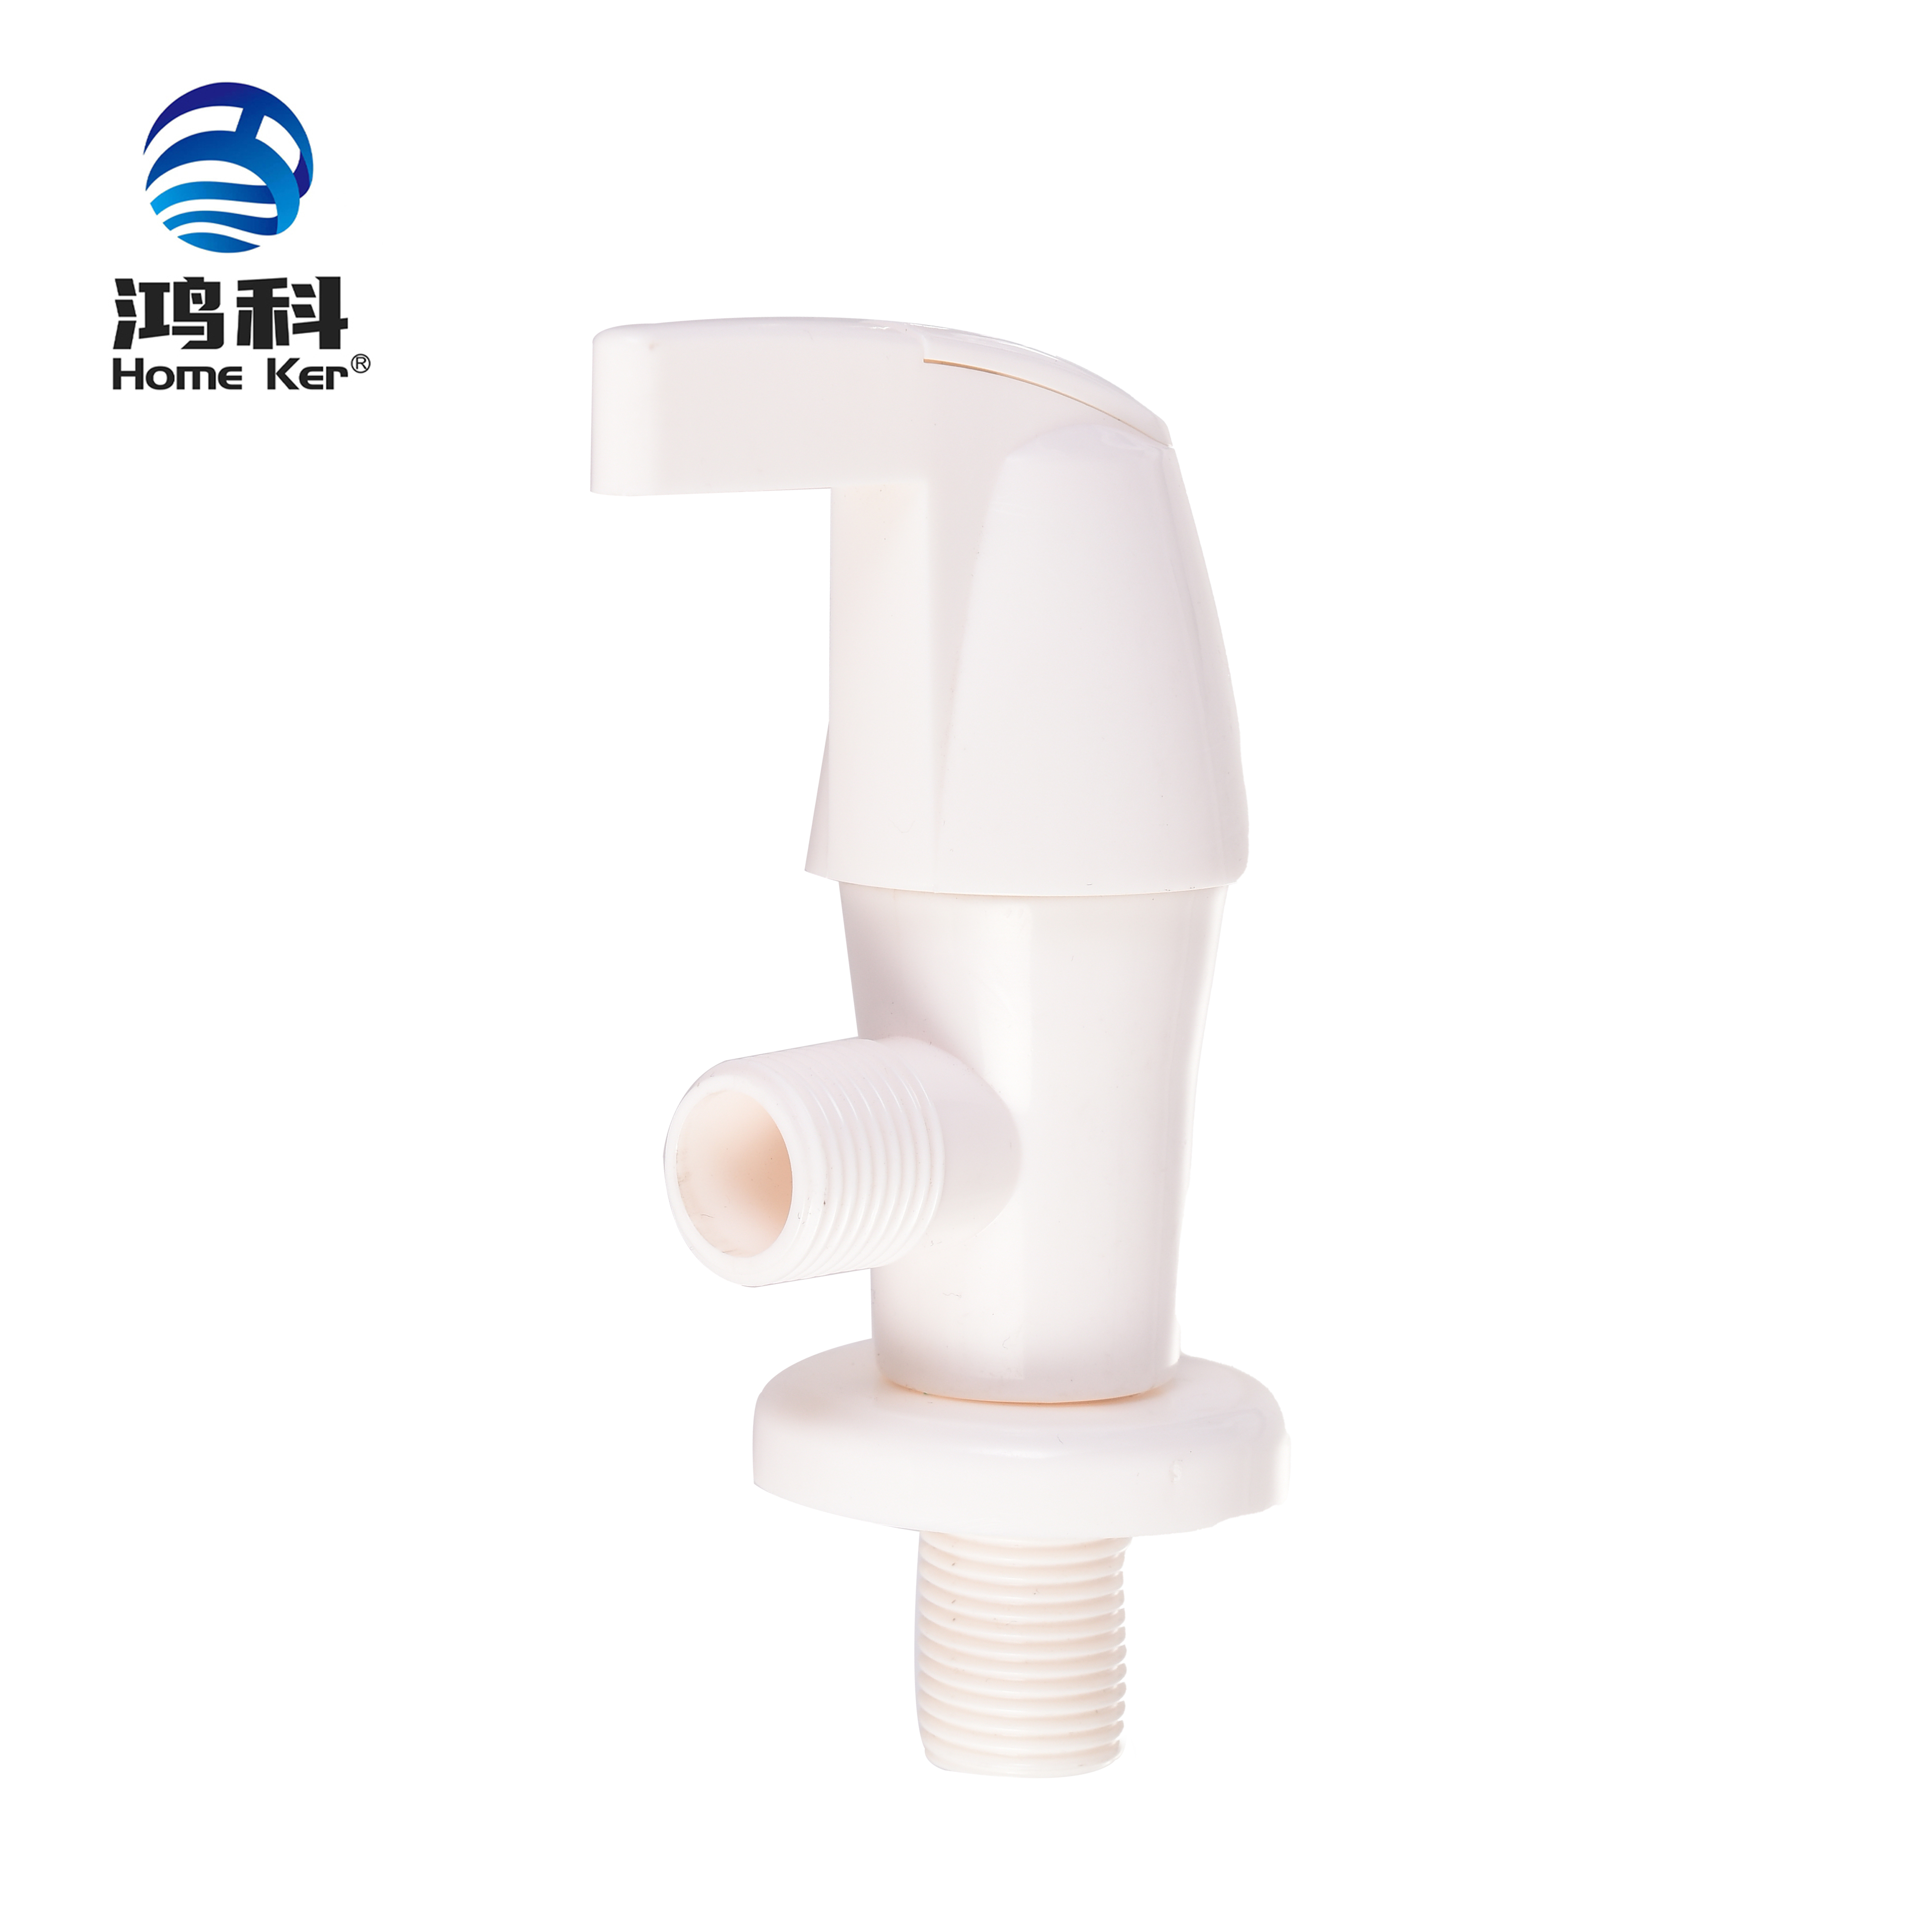 Plastic angle valve Supplier China Featured Image